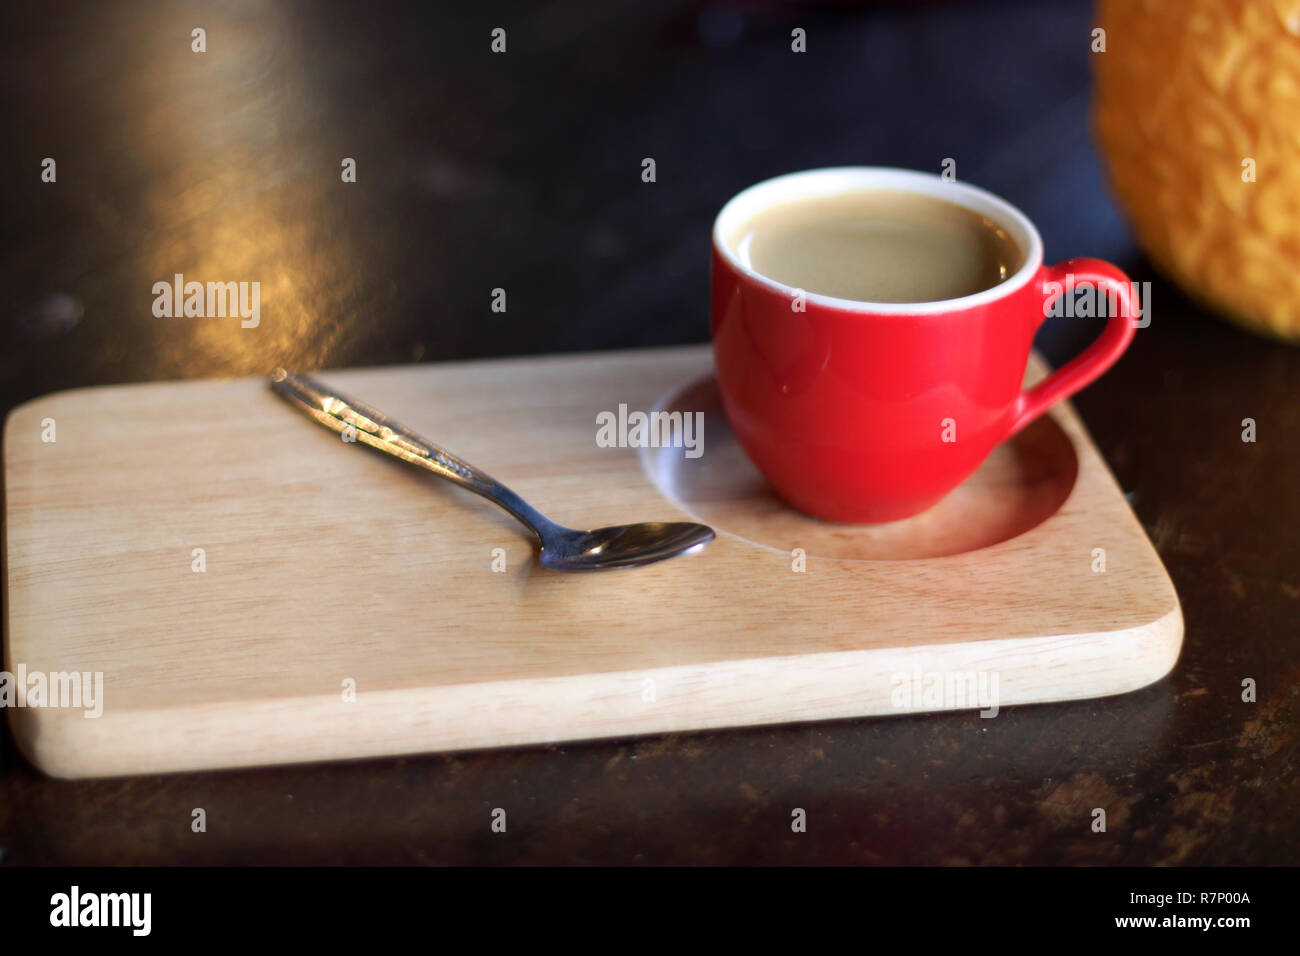 Red cup of coffee on wooden tray. Stock Photo